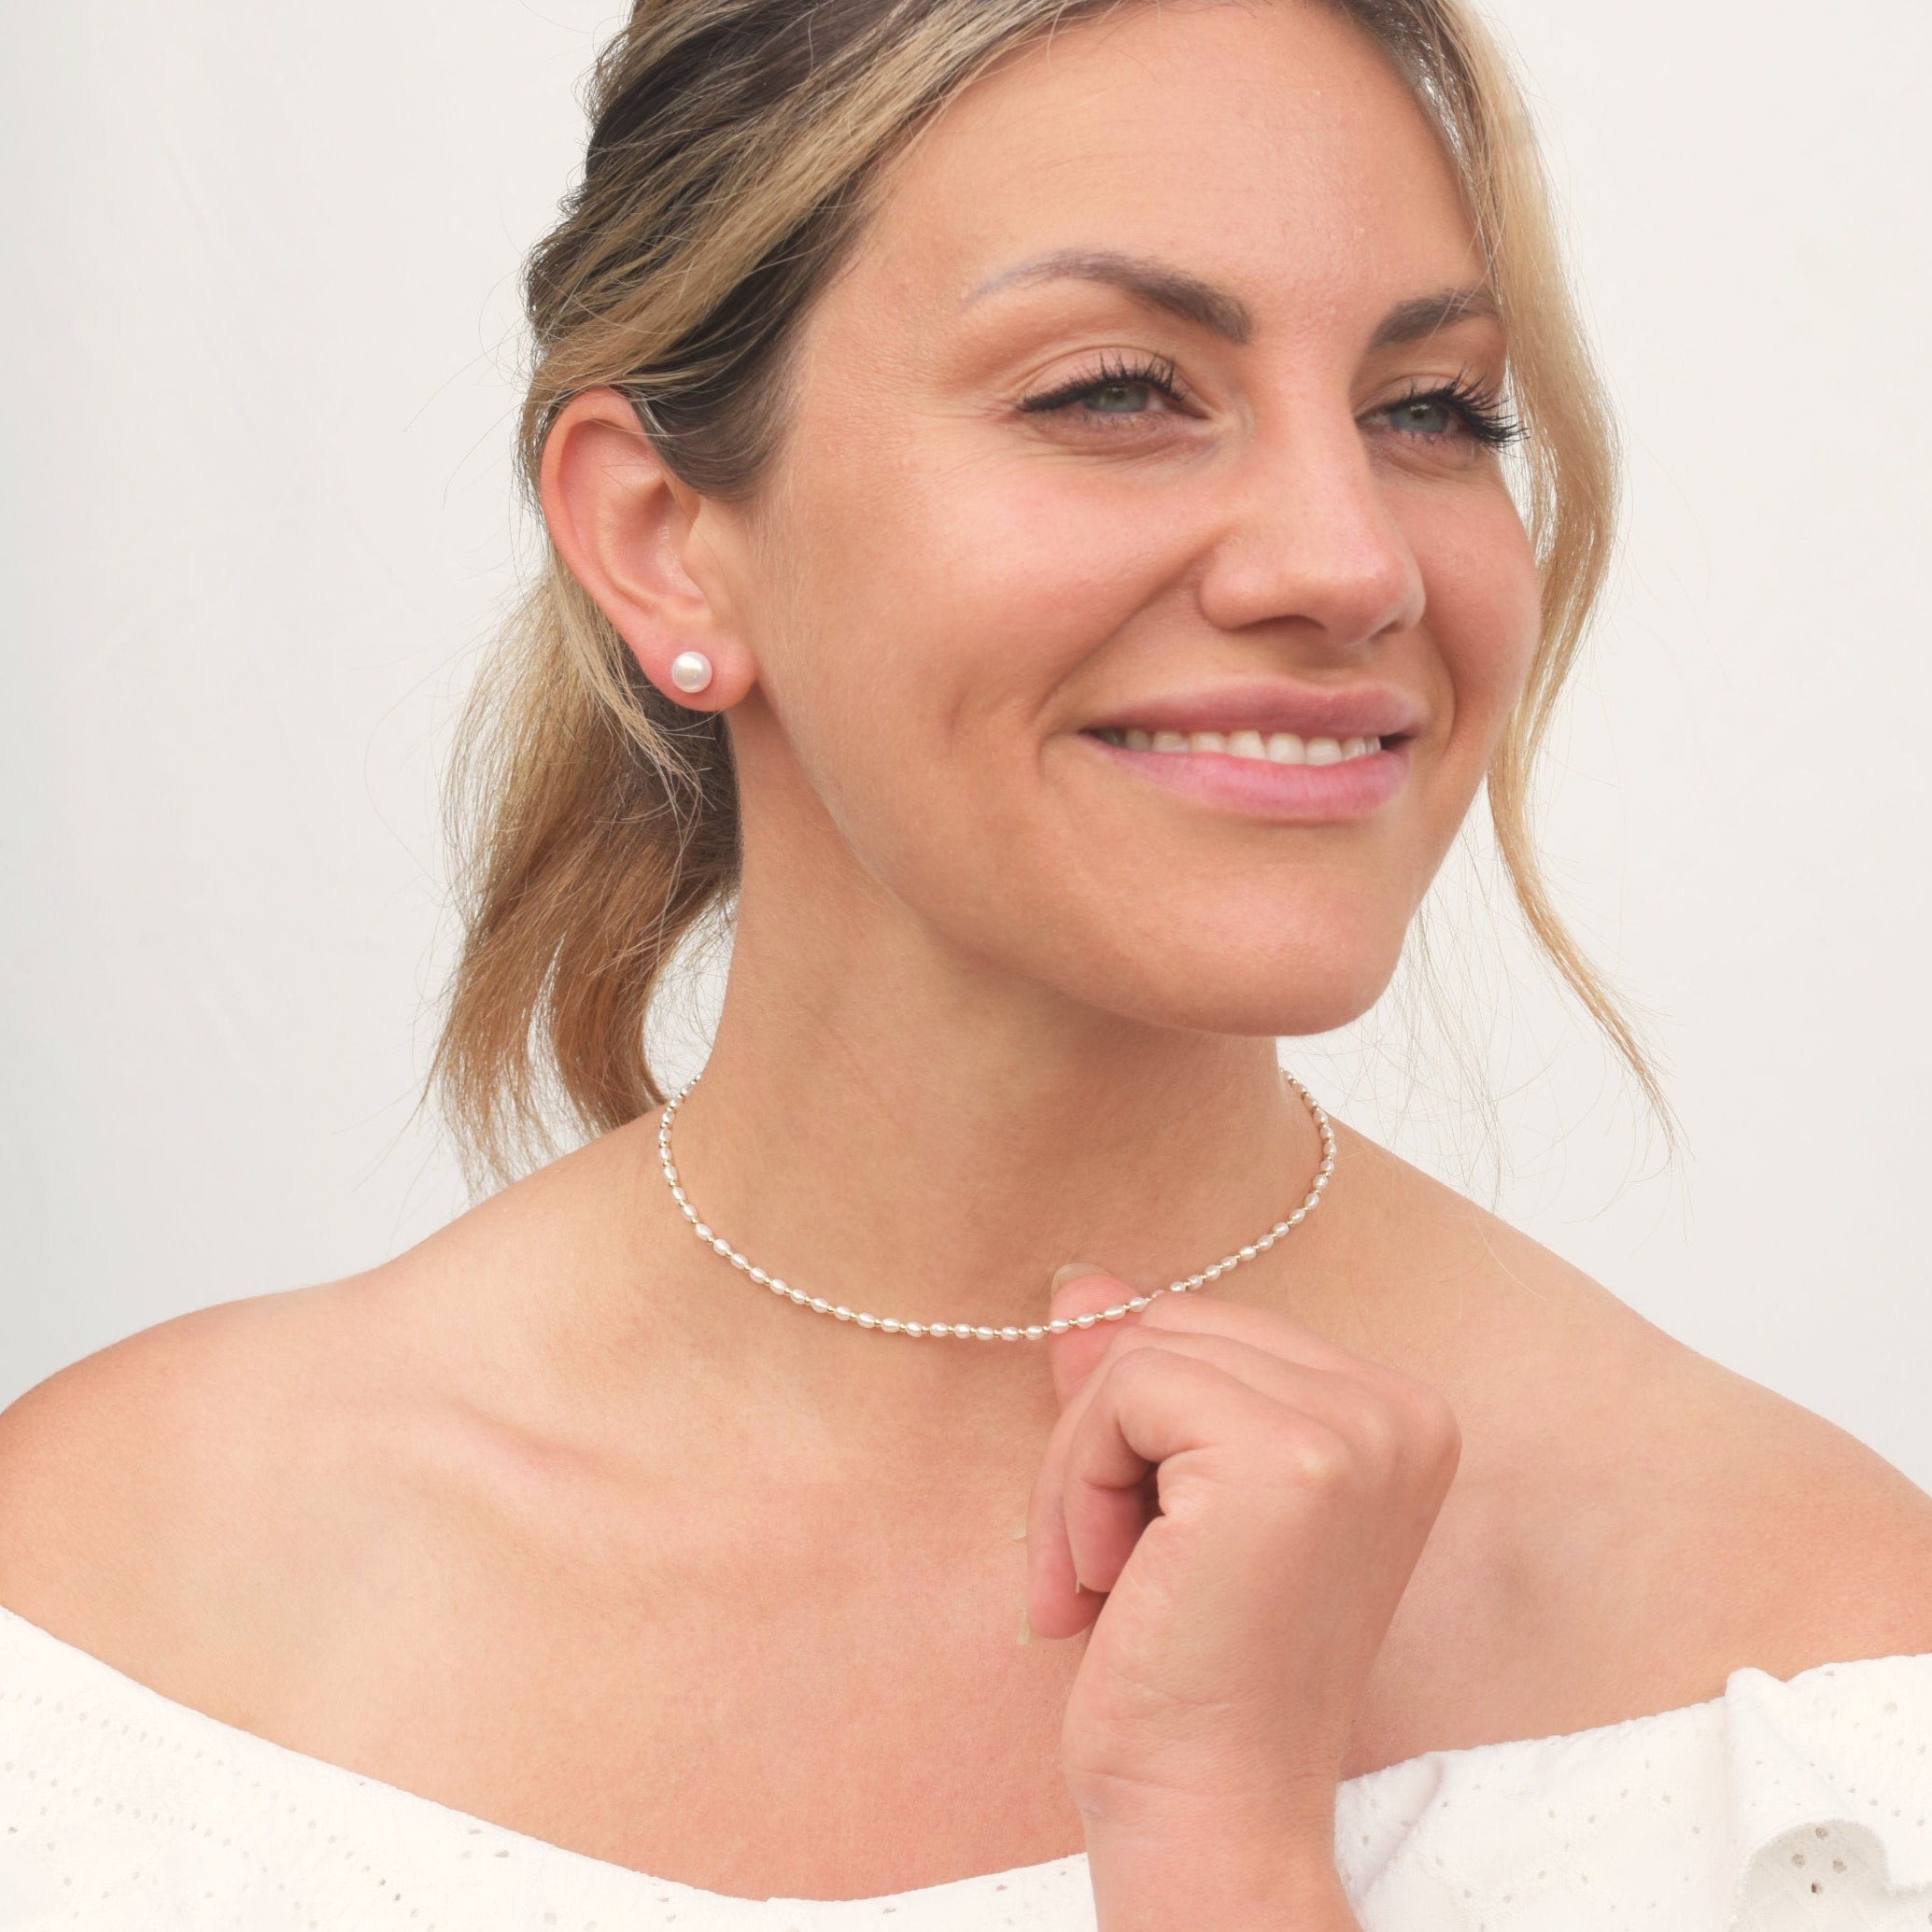 Model wearing pearl and gold bead necklace and pearl earrings